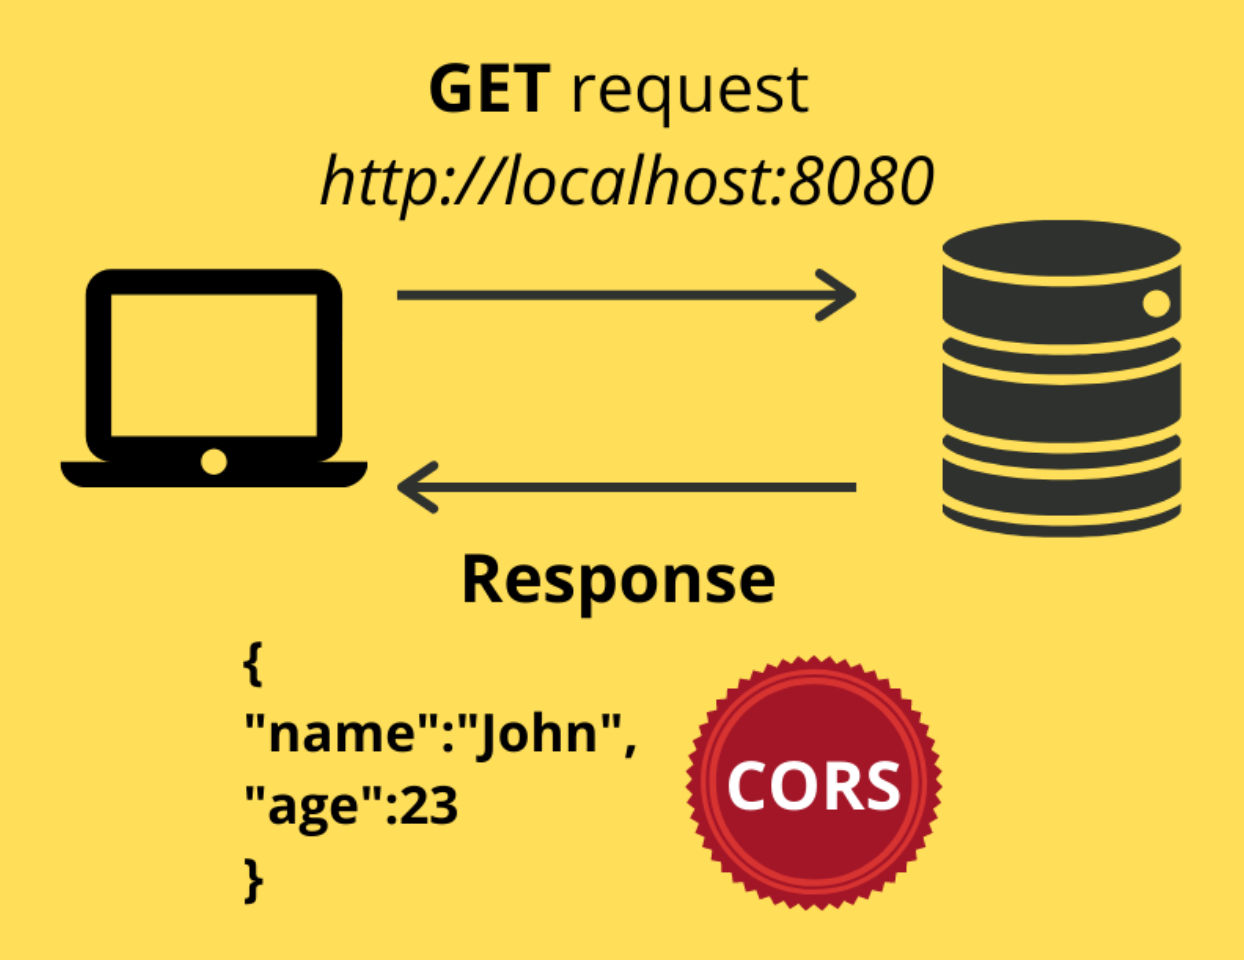 React CORS Guide: What It Is and How to Enable It image